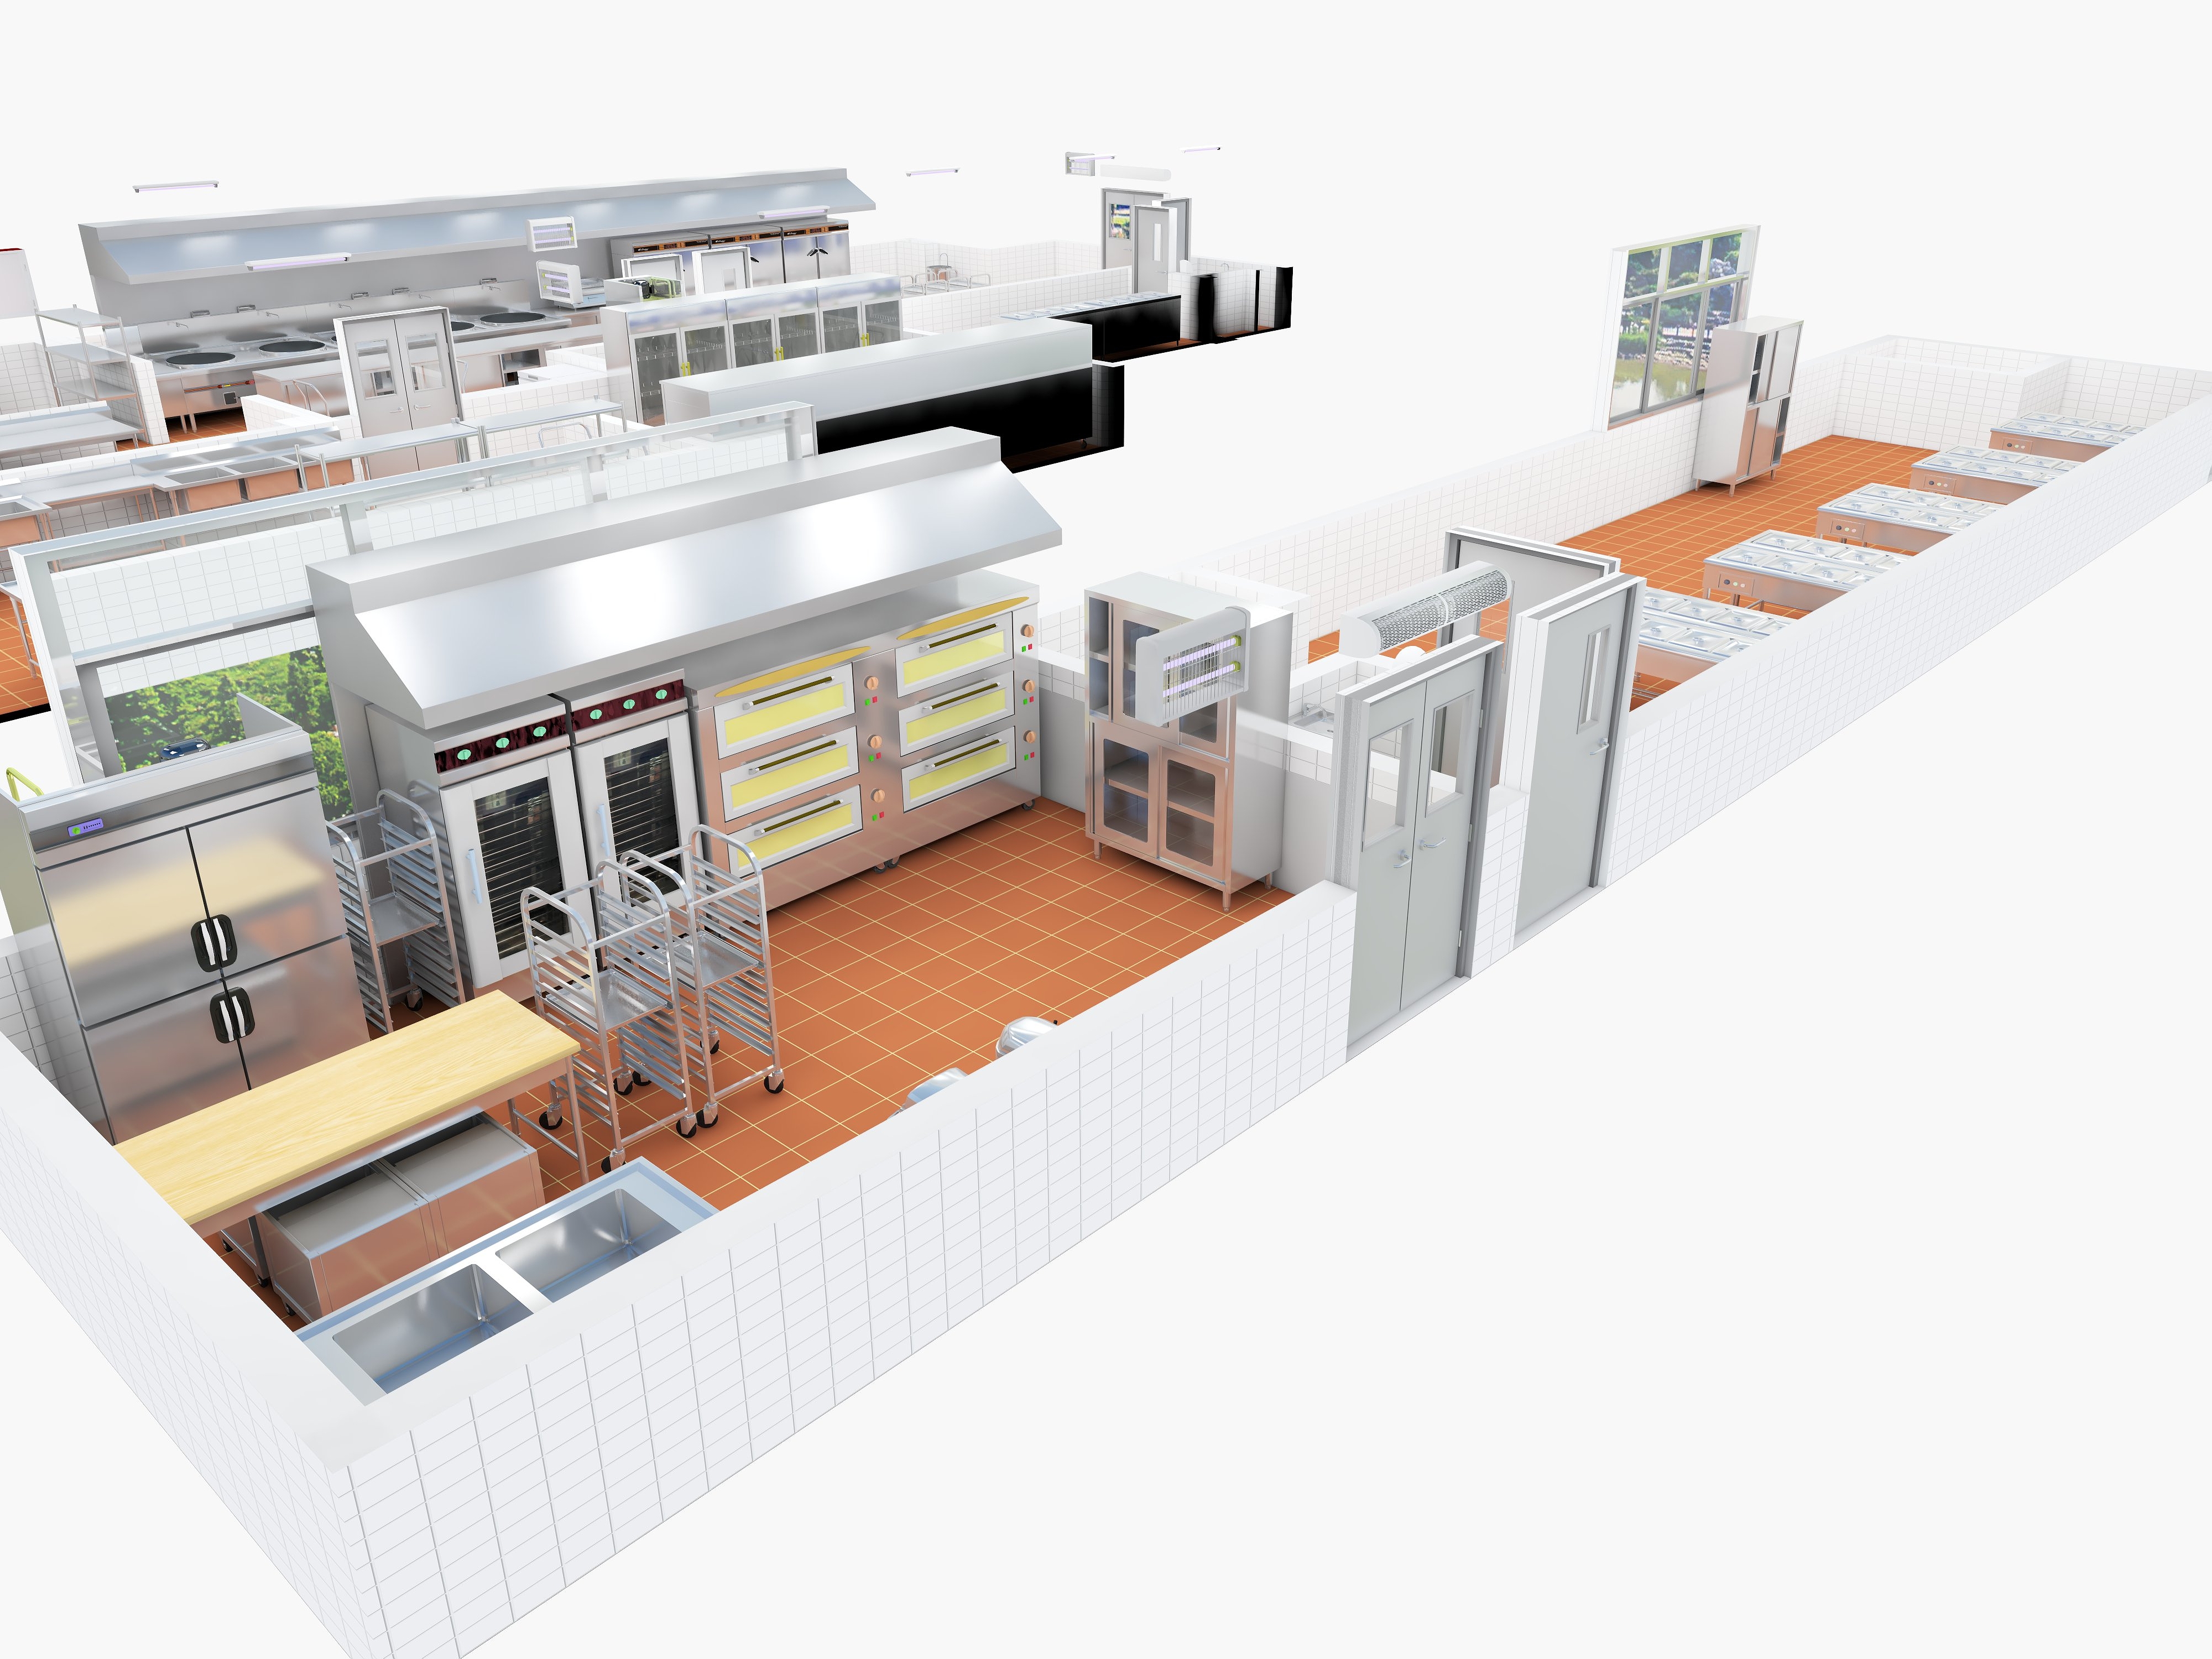 Commercial kitchen design: improve efficiency and reduce cost, optimize storage